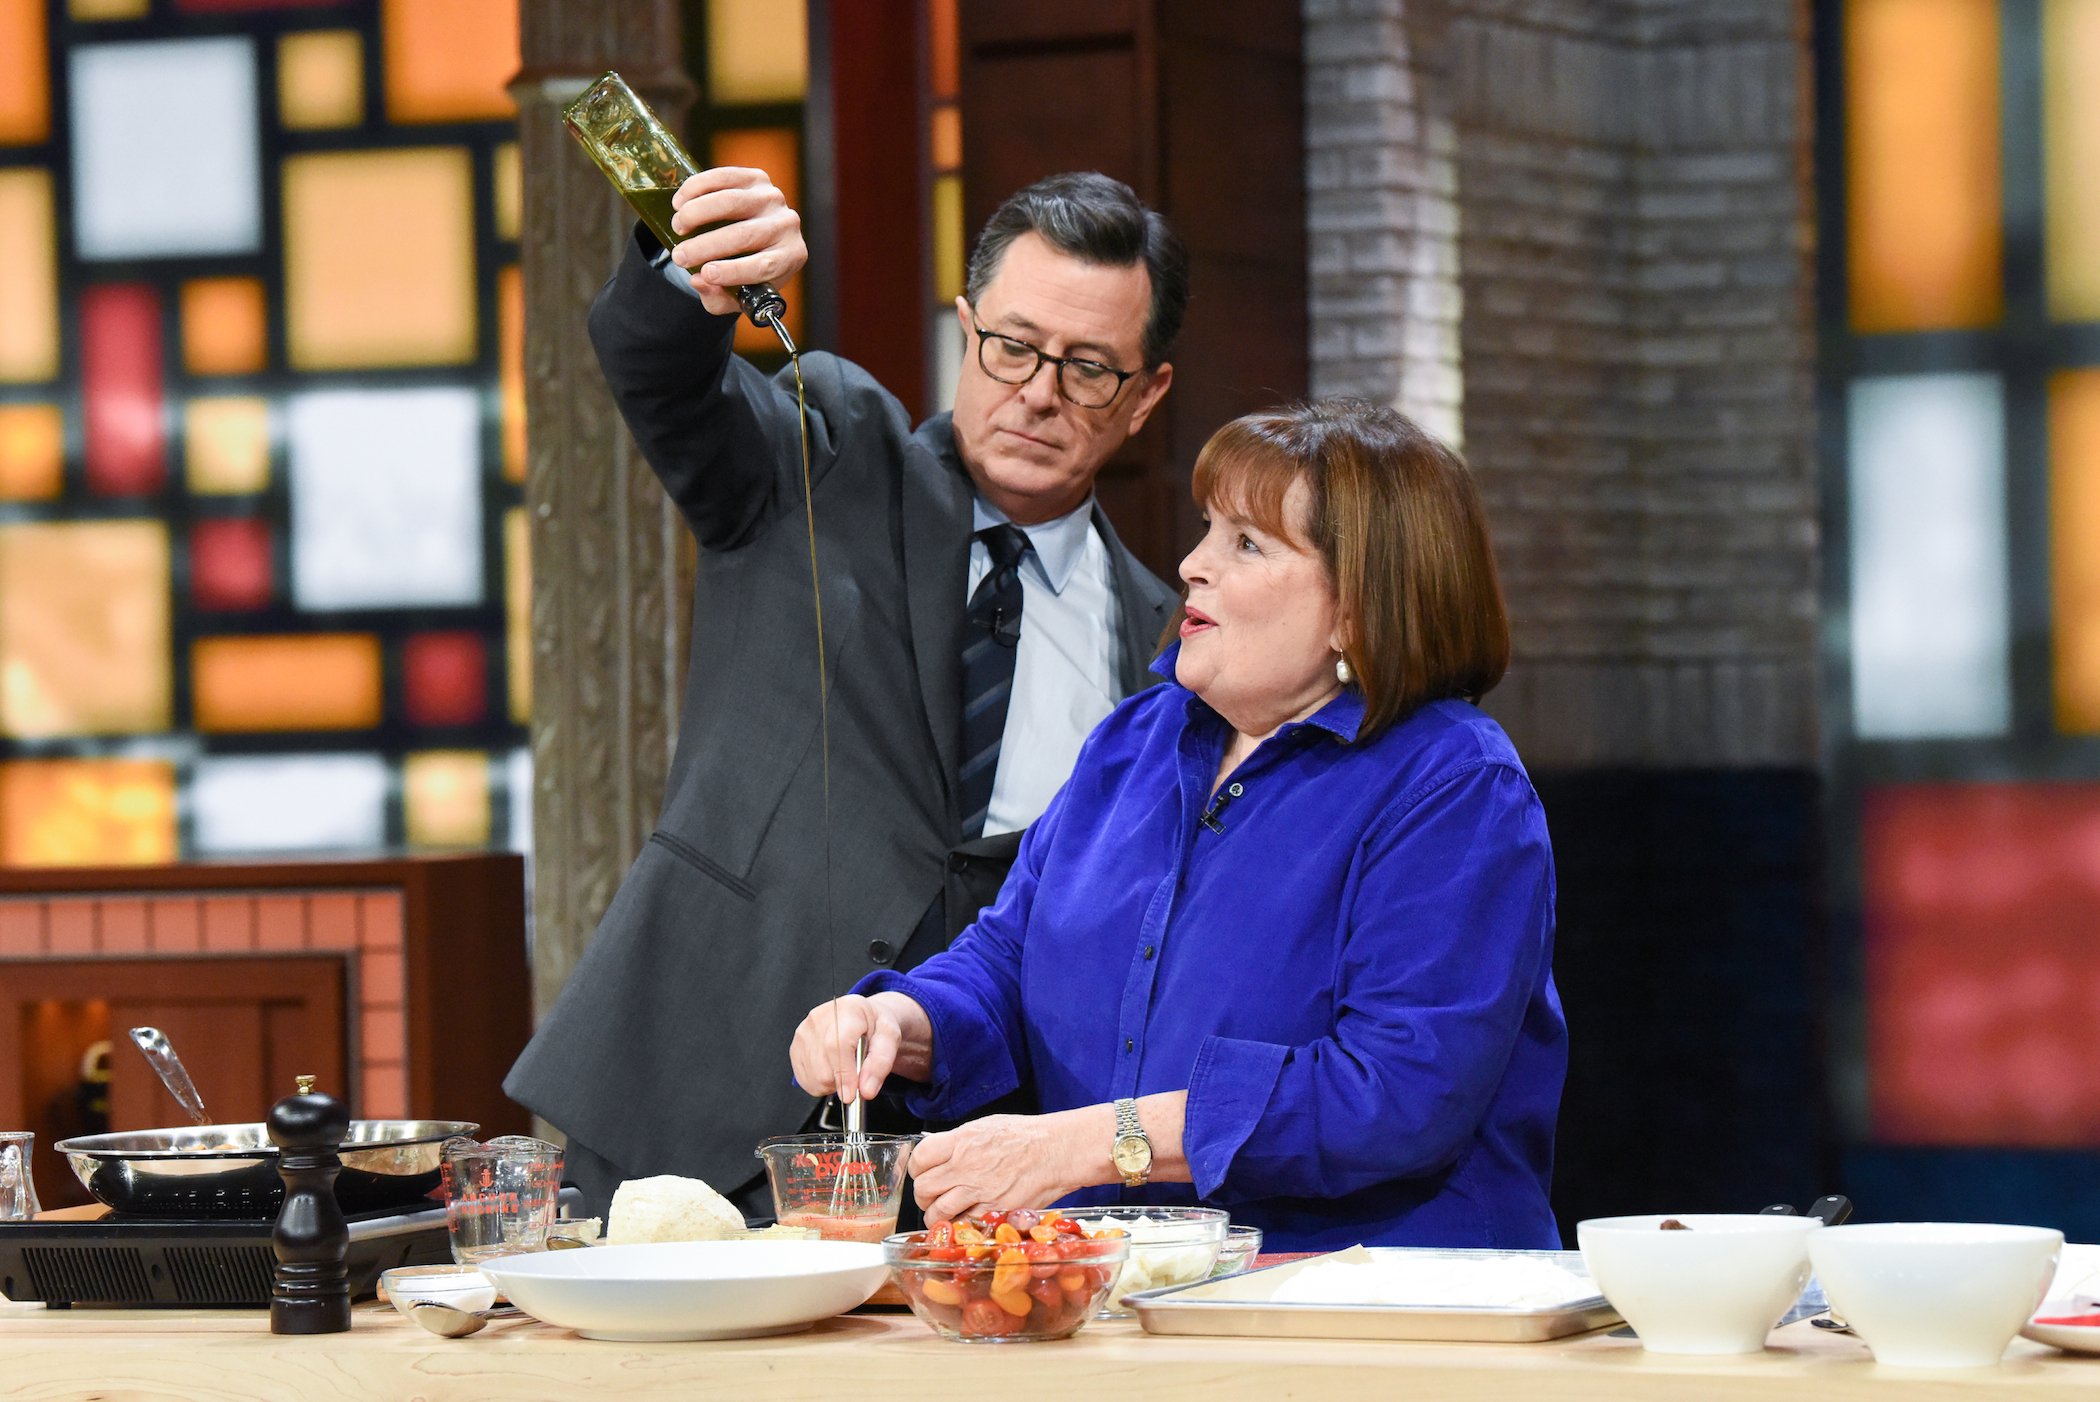 Ina Garten cooks with Stephen Colbert, seen pouring oil